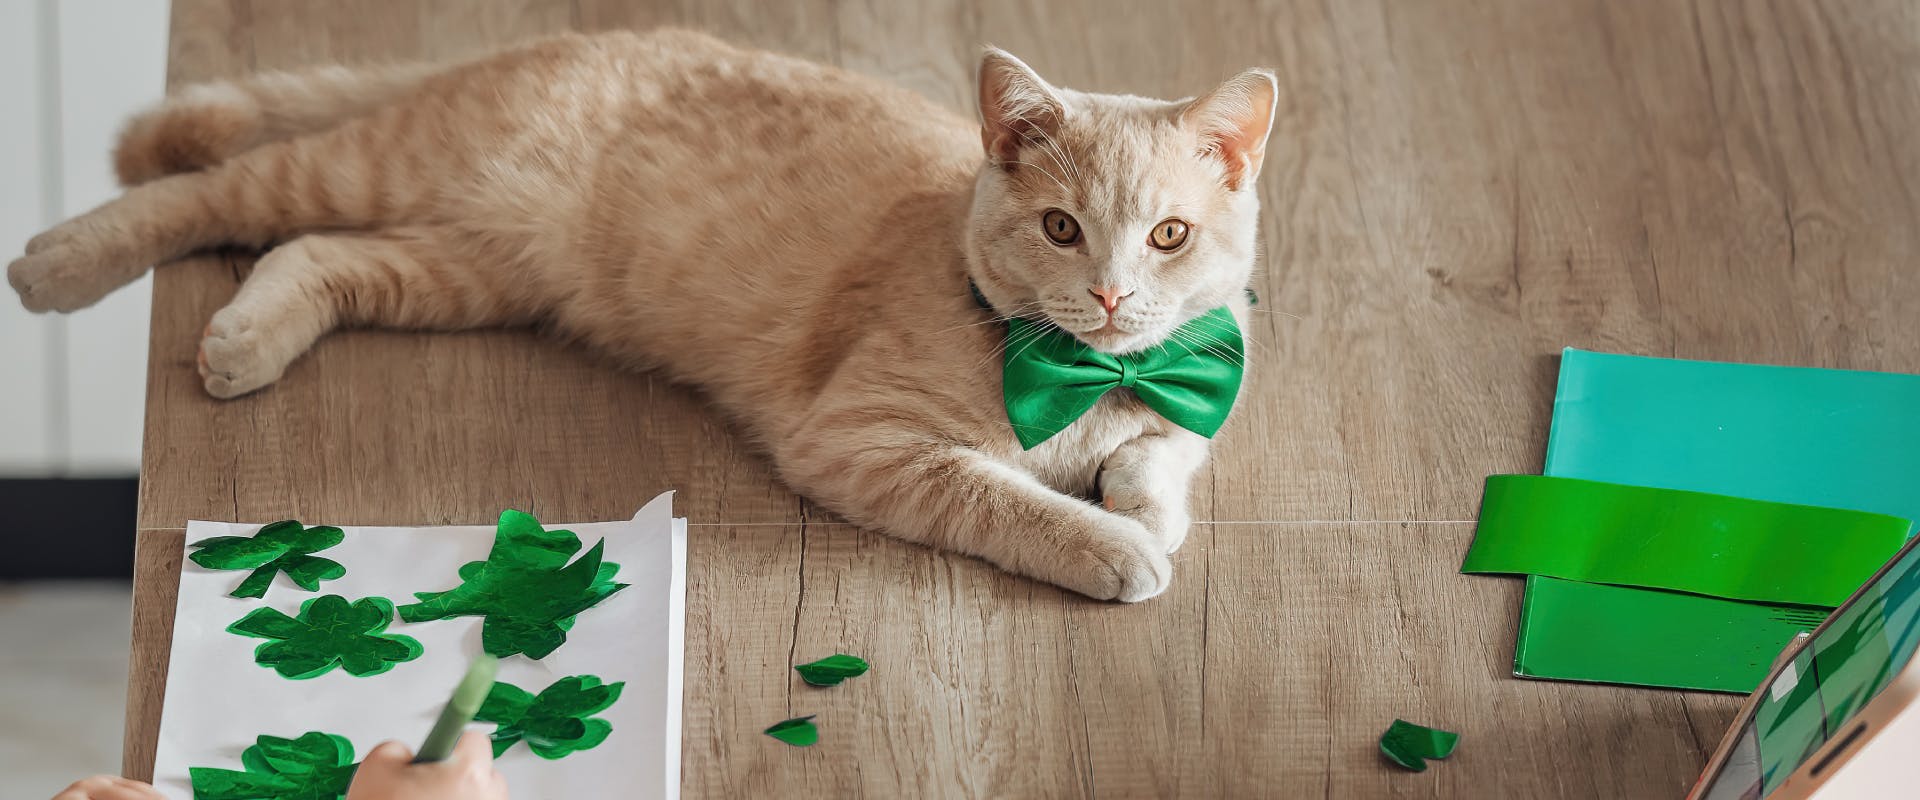 light ginger cat wearing a green bow tie next to paper cut of shamrocks